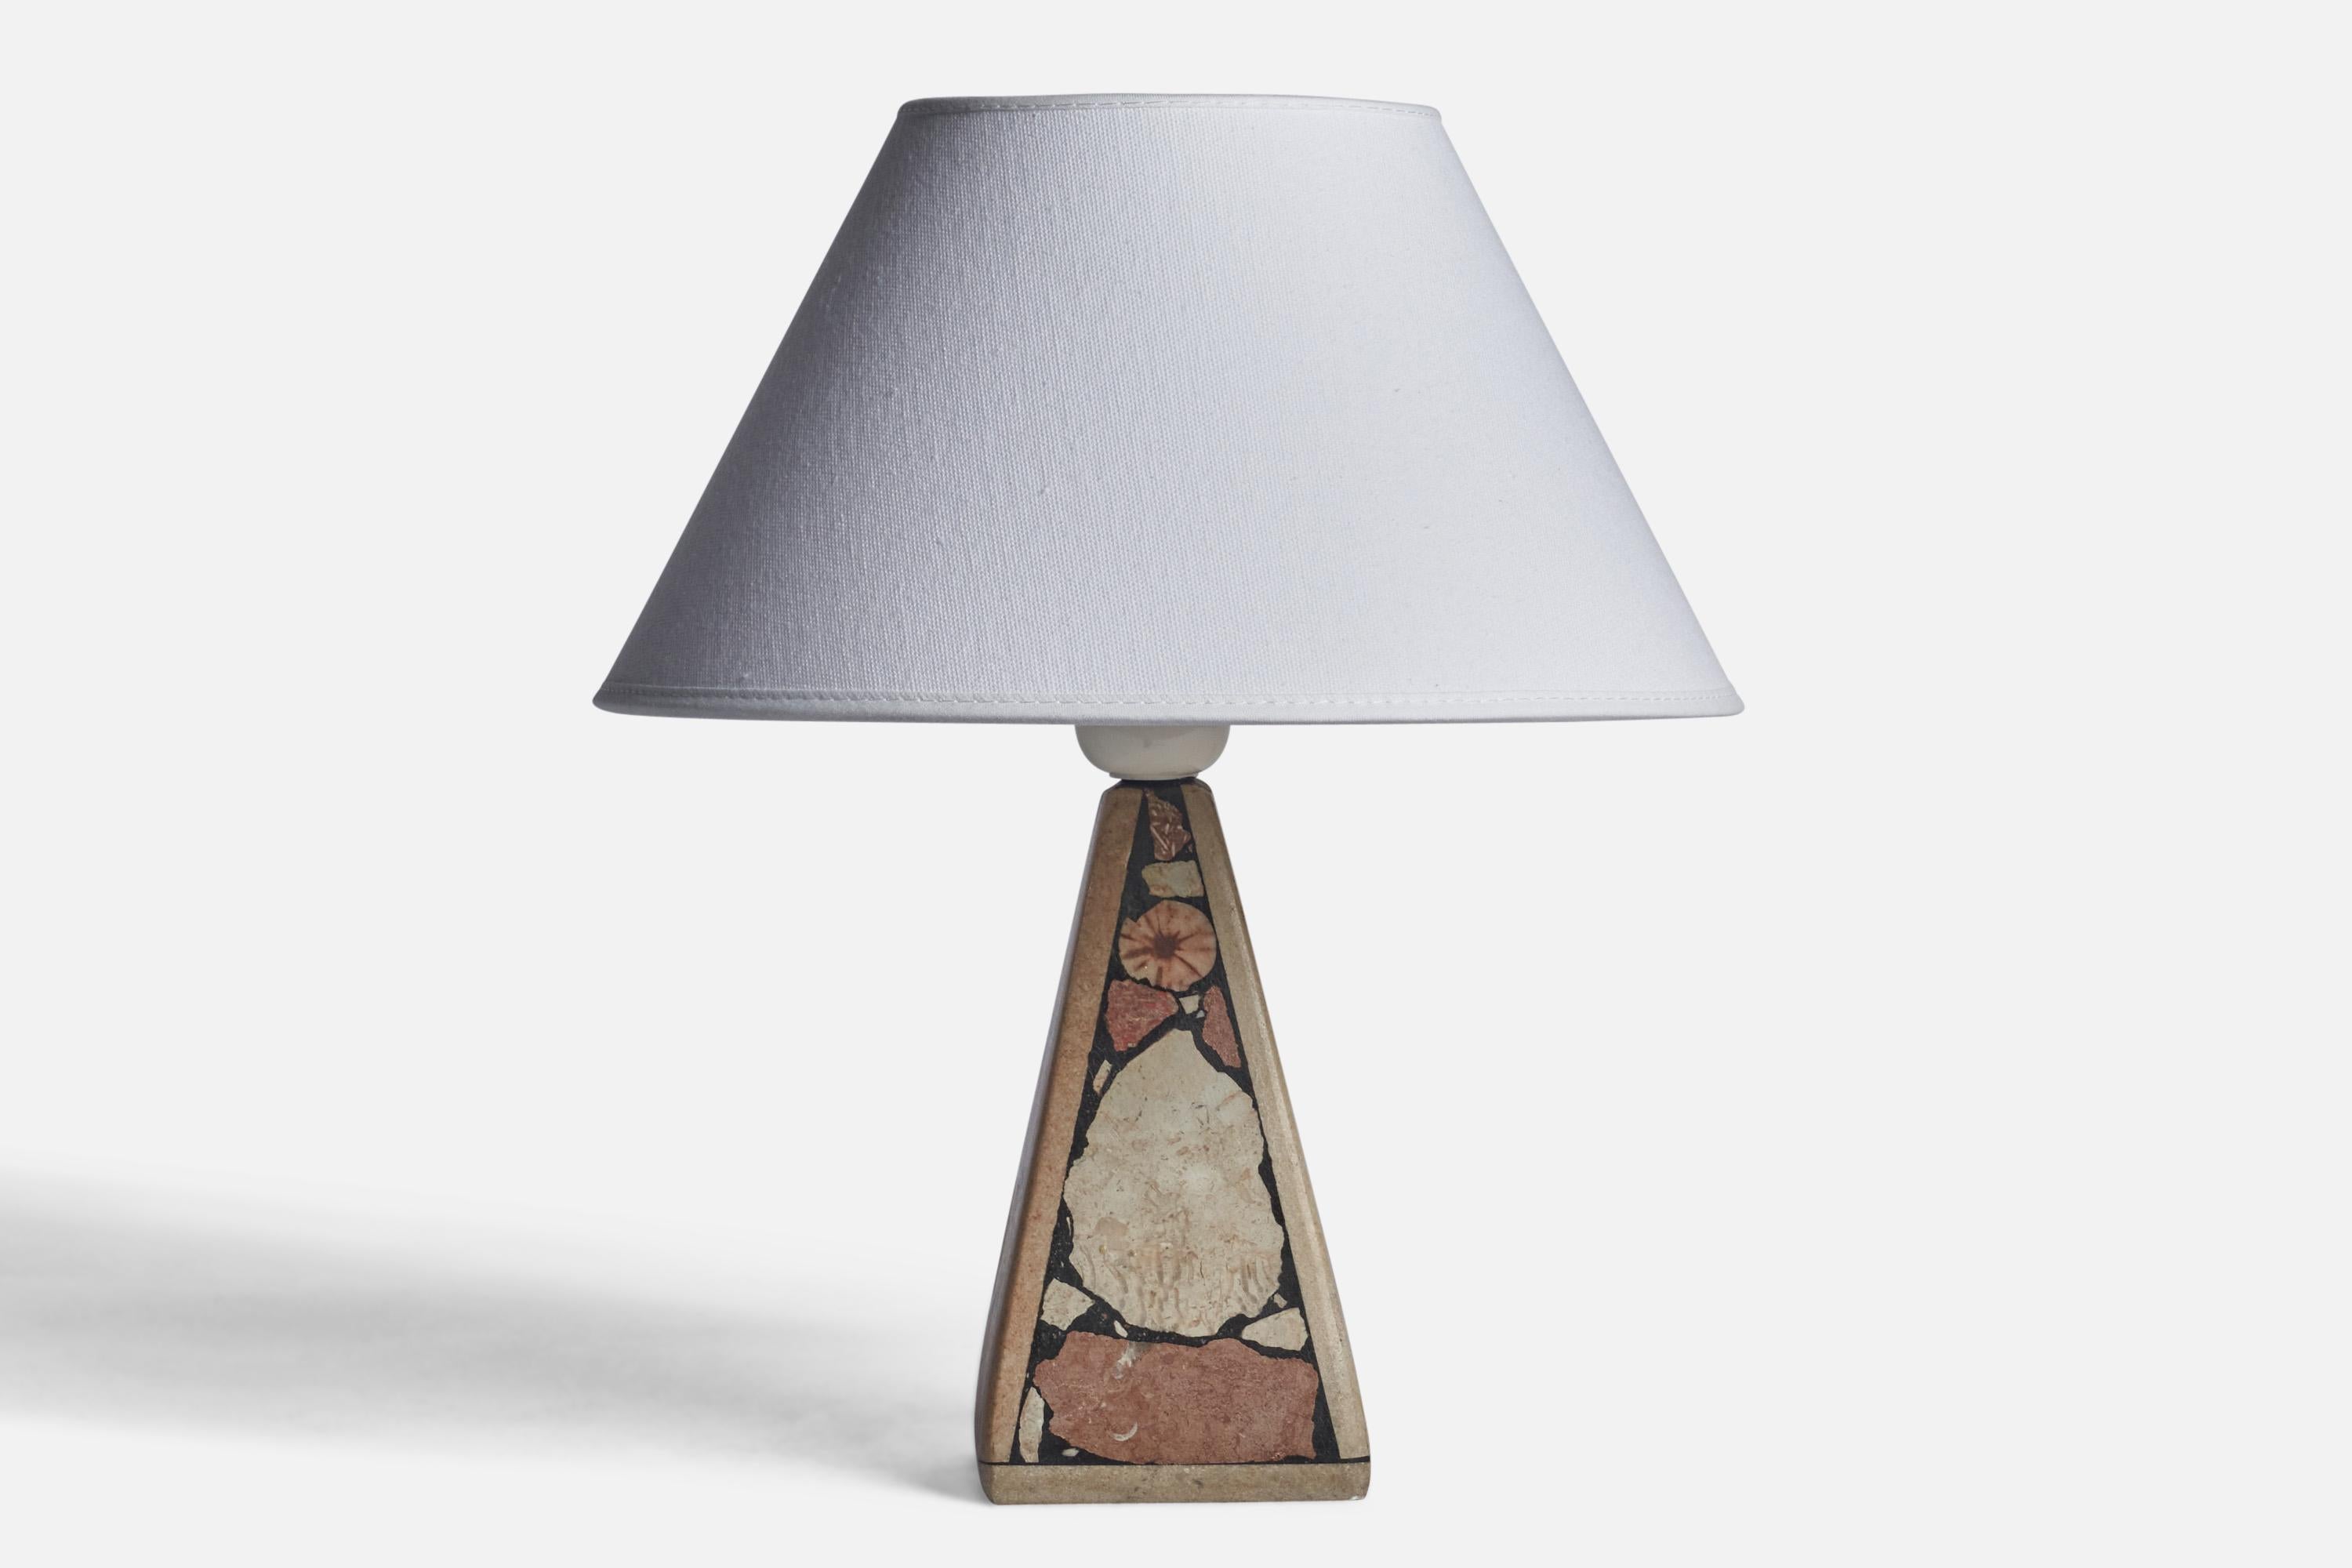 A fossil stone table lamp designed and produced in Gotland, Sweden, c. 1970s.

Dimensions of Lamp (inches): 8.25” H x 3.45” Diameter
Dimensions of Shade (inches): 4” Top Diameter x 10” Bottom Diameter x 5.25” H 
Dimensions of Lamp with Shade